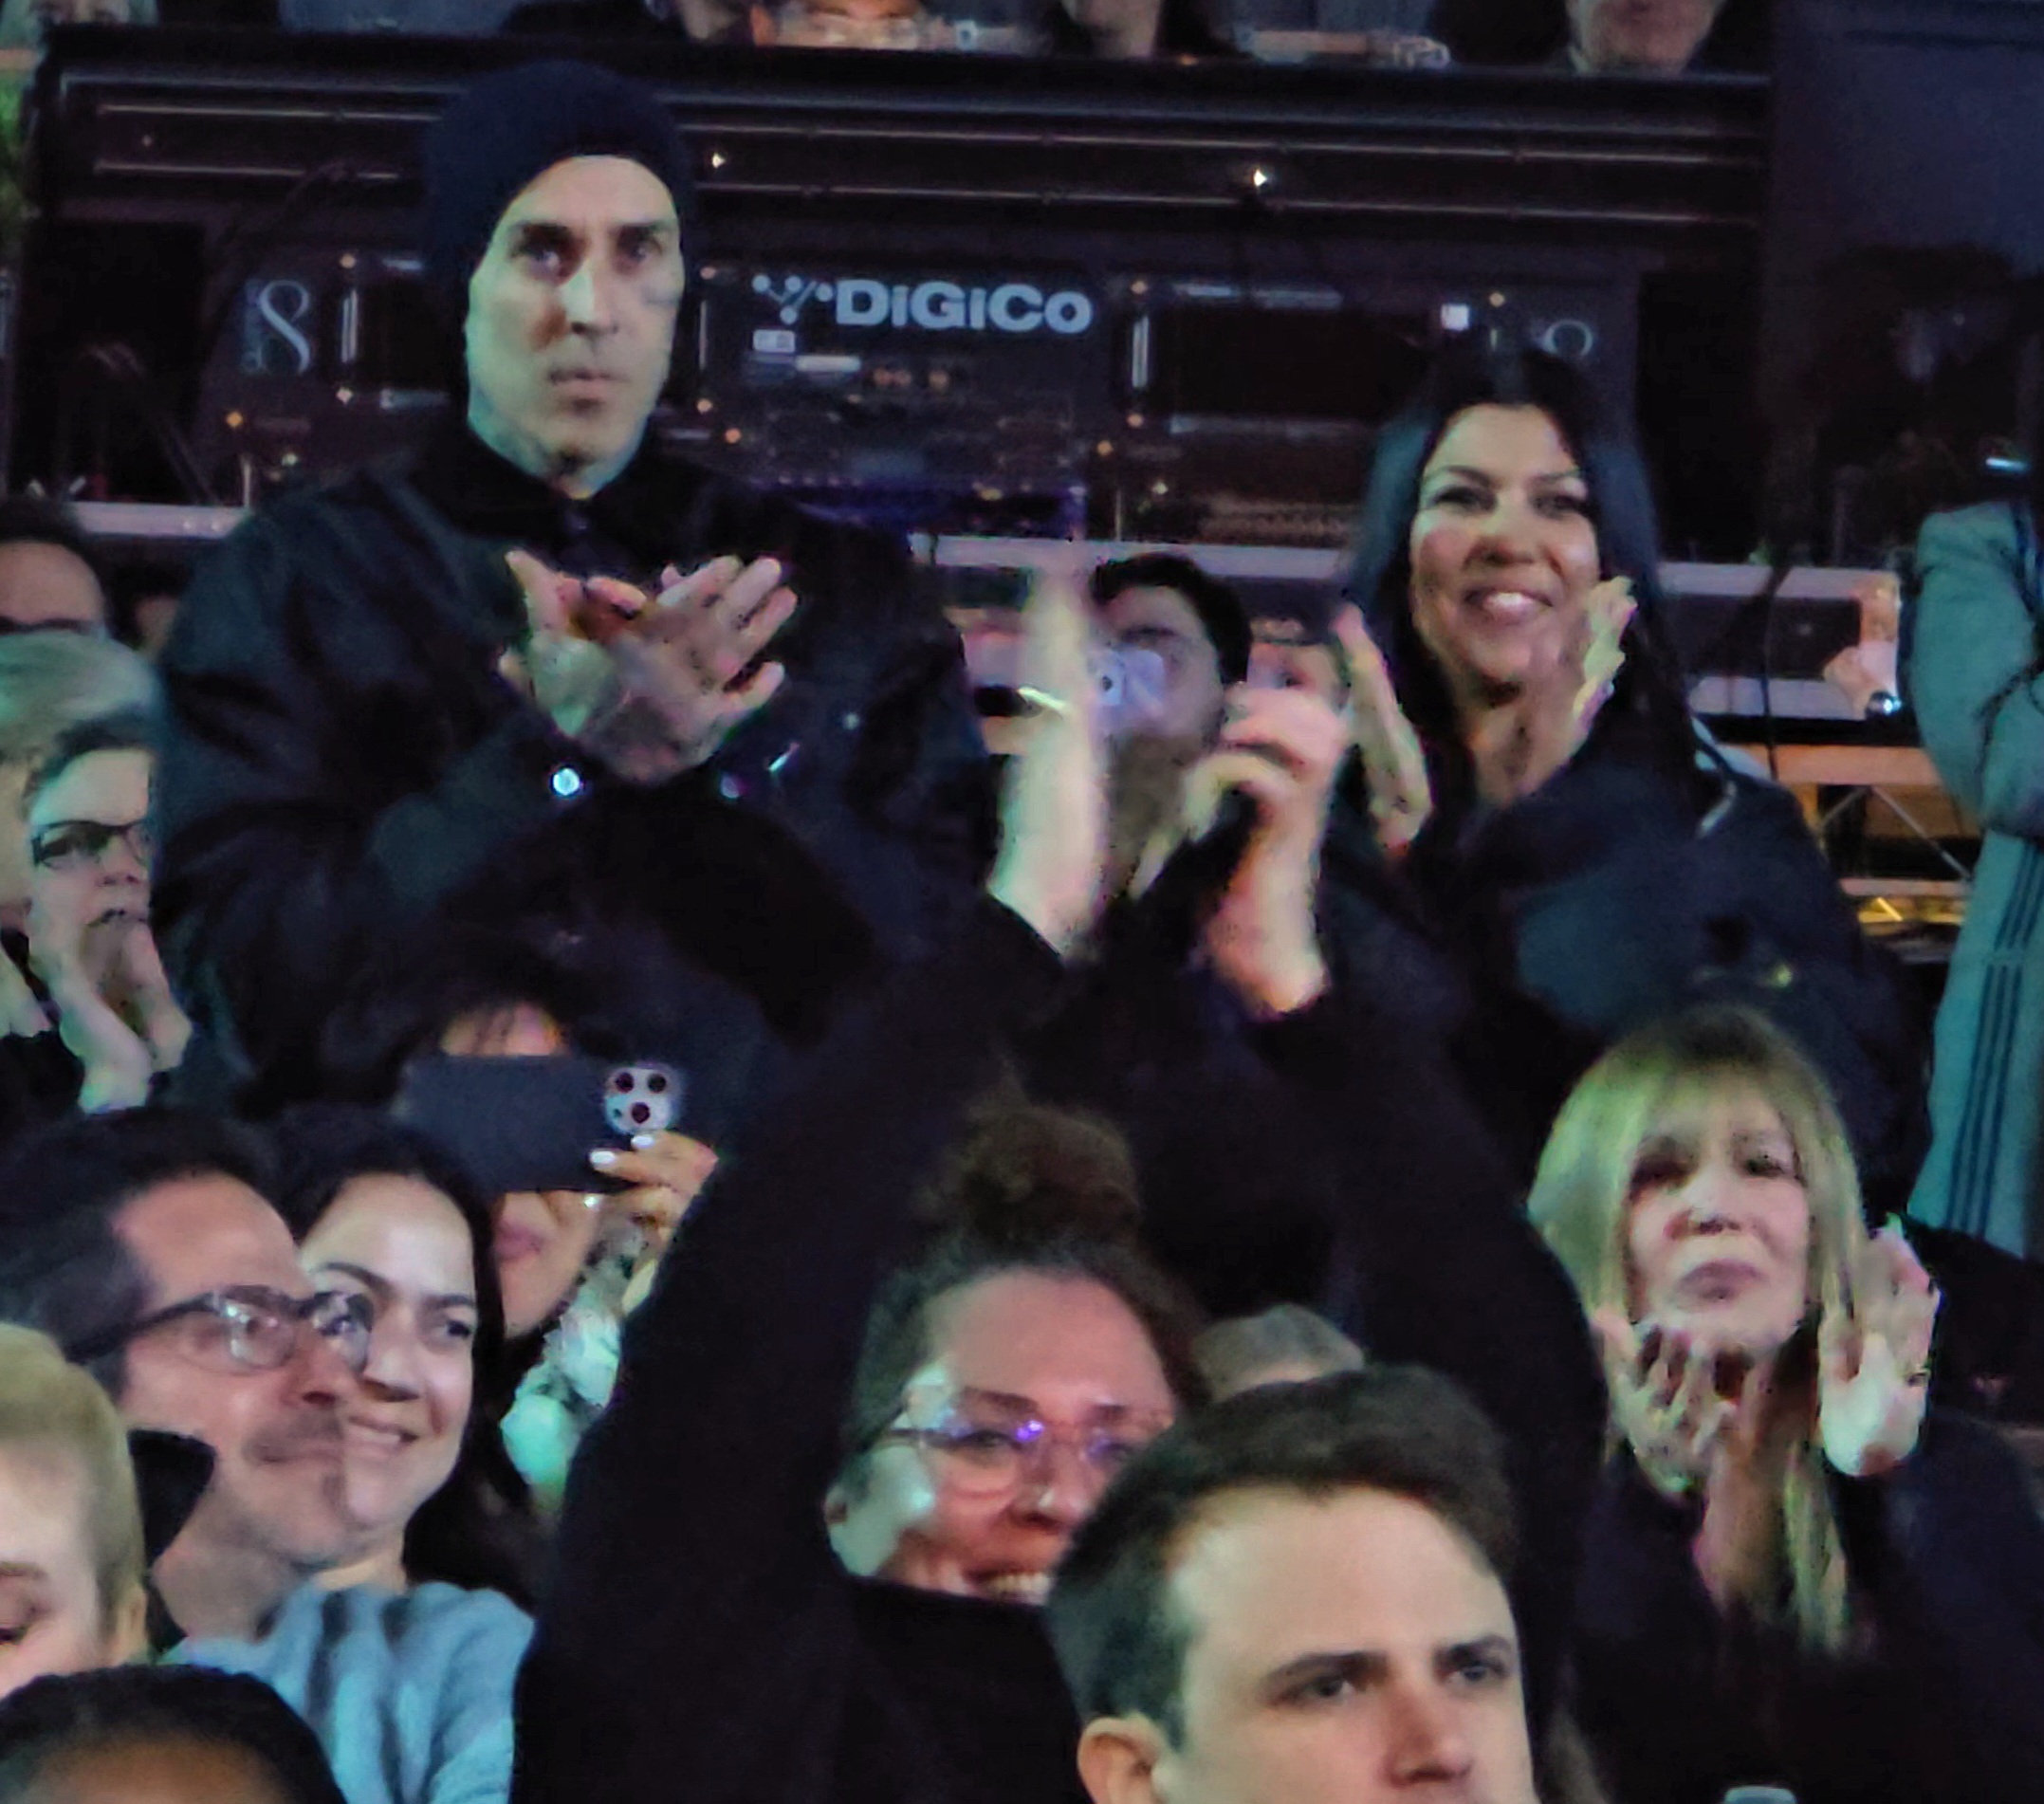 Kourtney Kardashian and Travis Barker also showed their support with a standing ovation